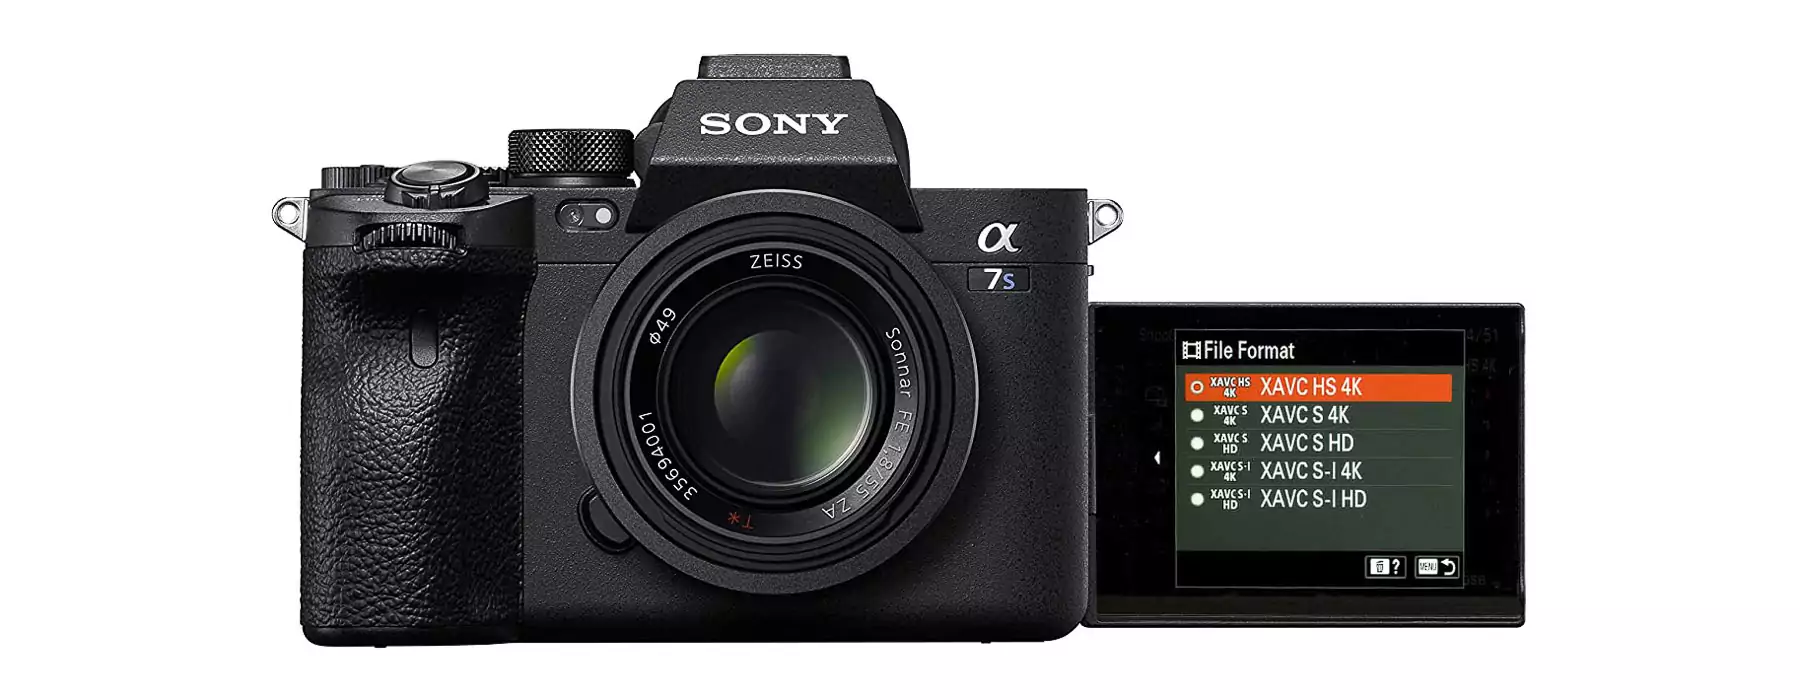 Mastering Video Setting in Sony Camera